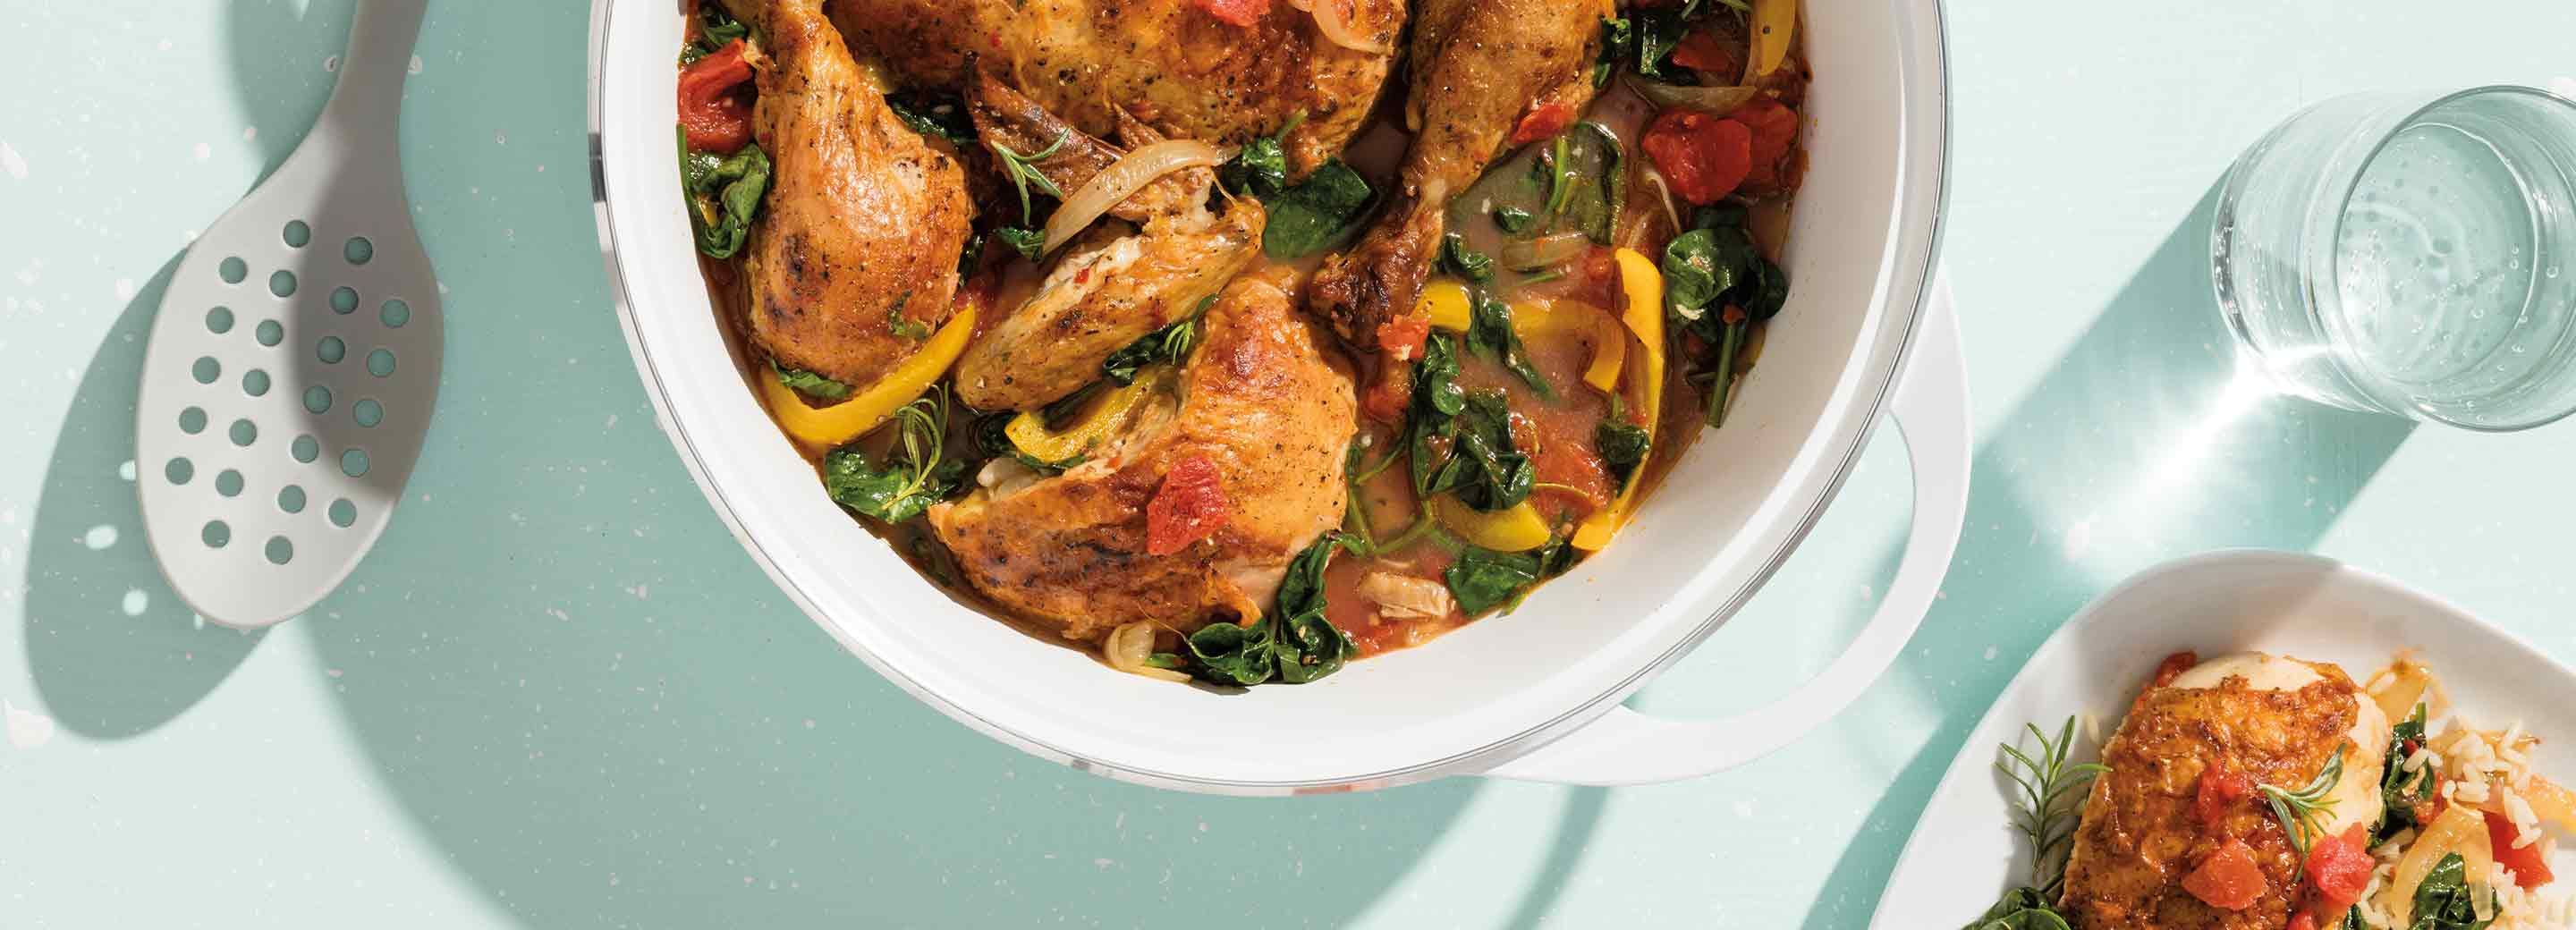 Braised Rotisserie Chicken with Spinach and Tomato